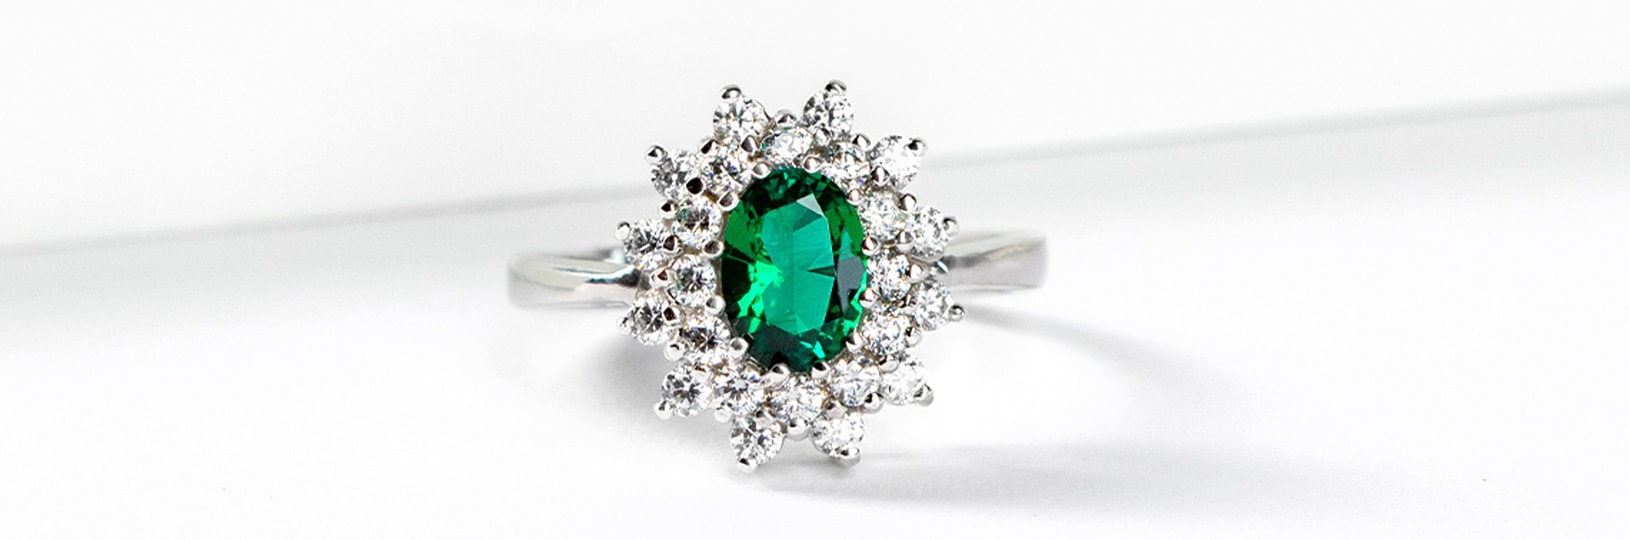 An emerald stone in a halo setting